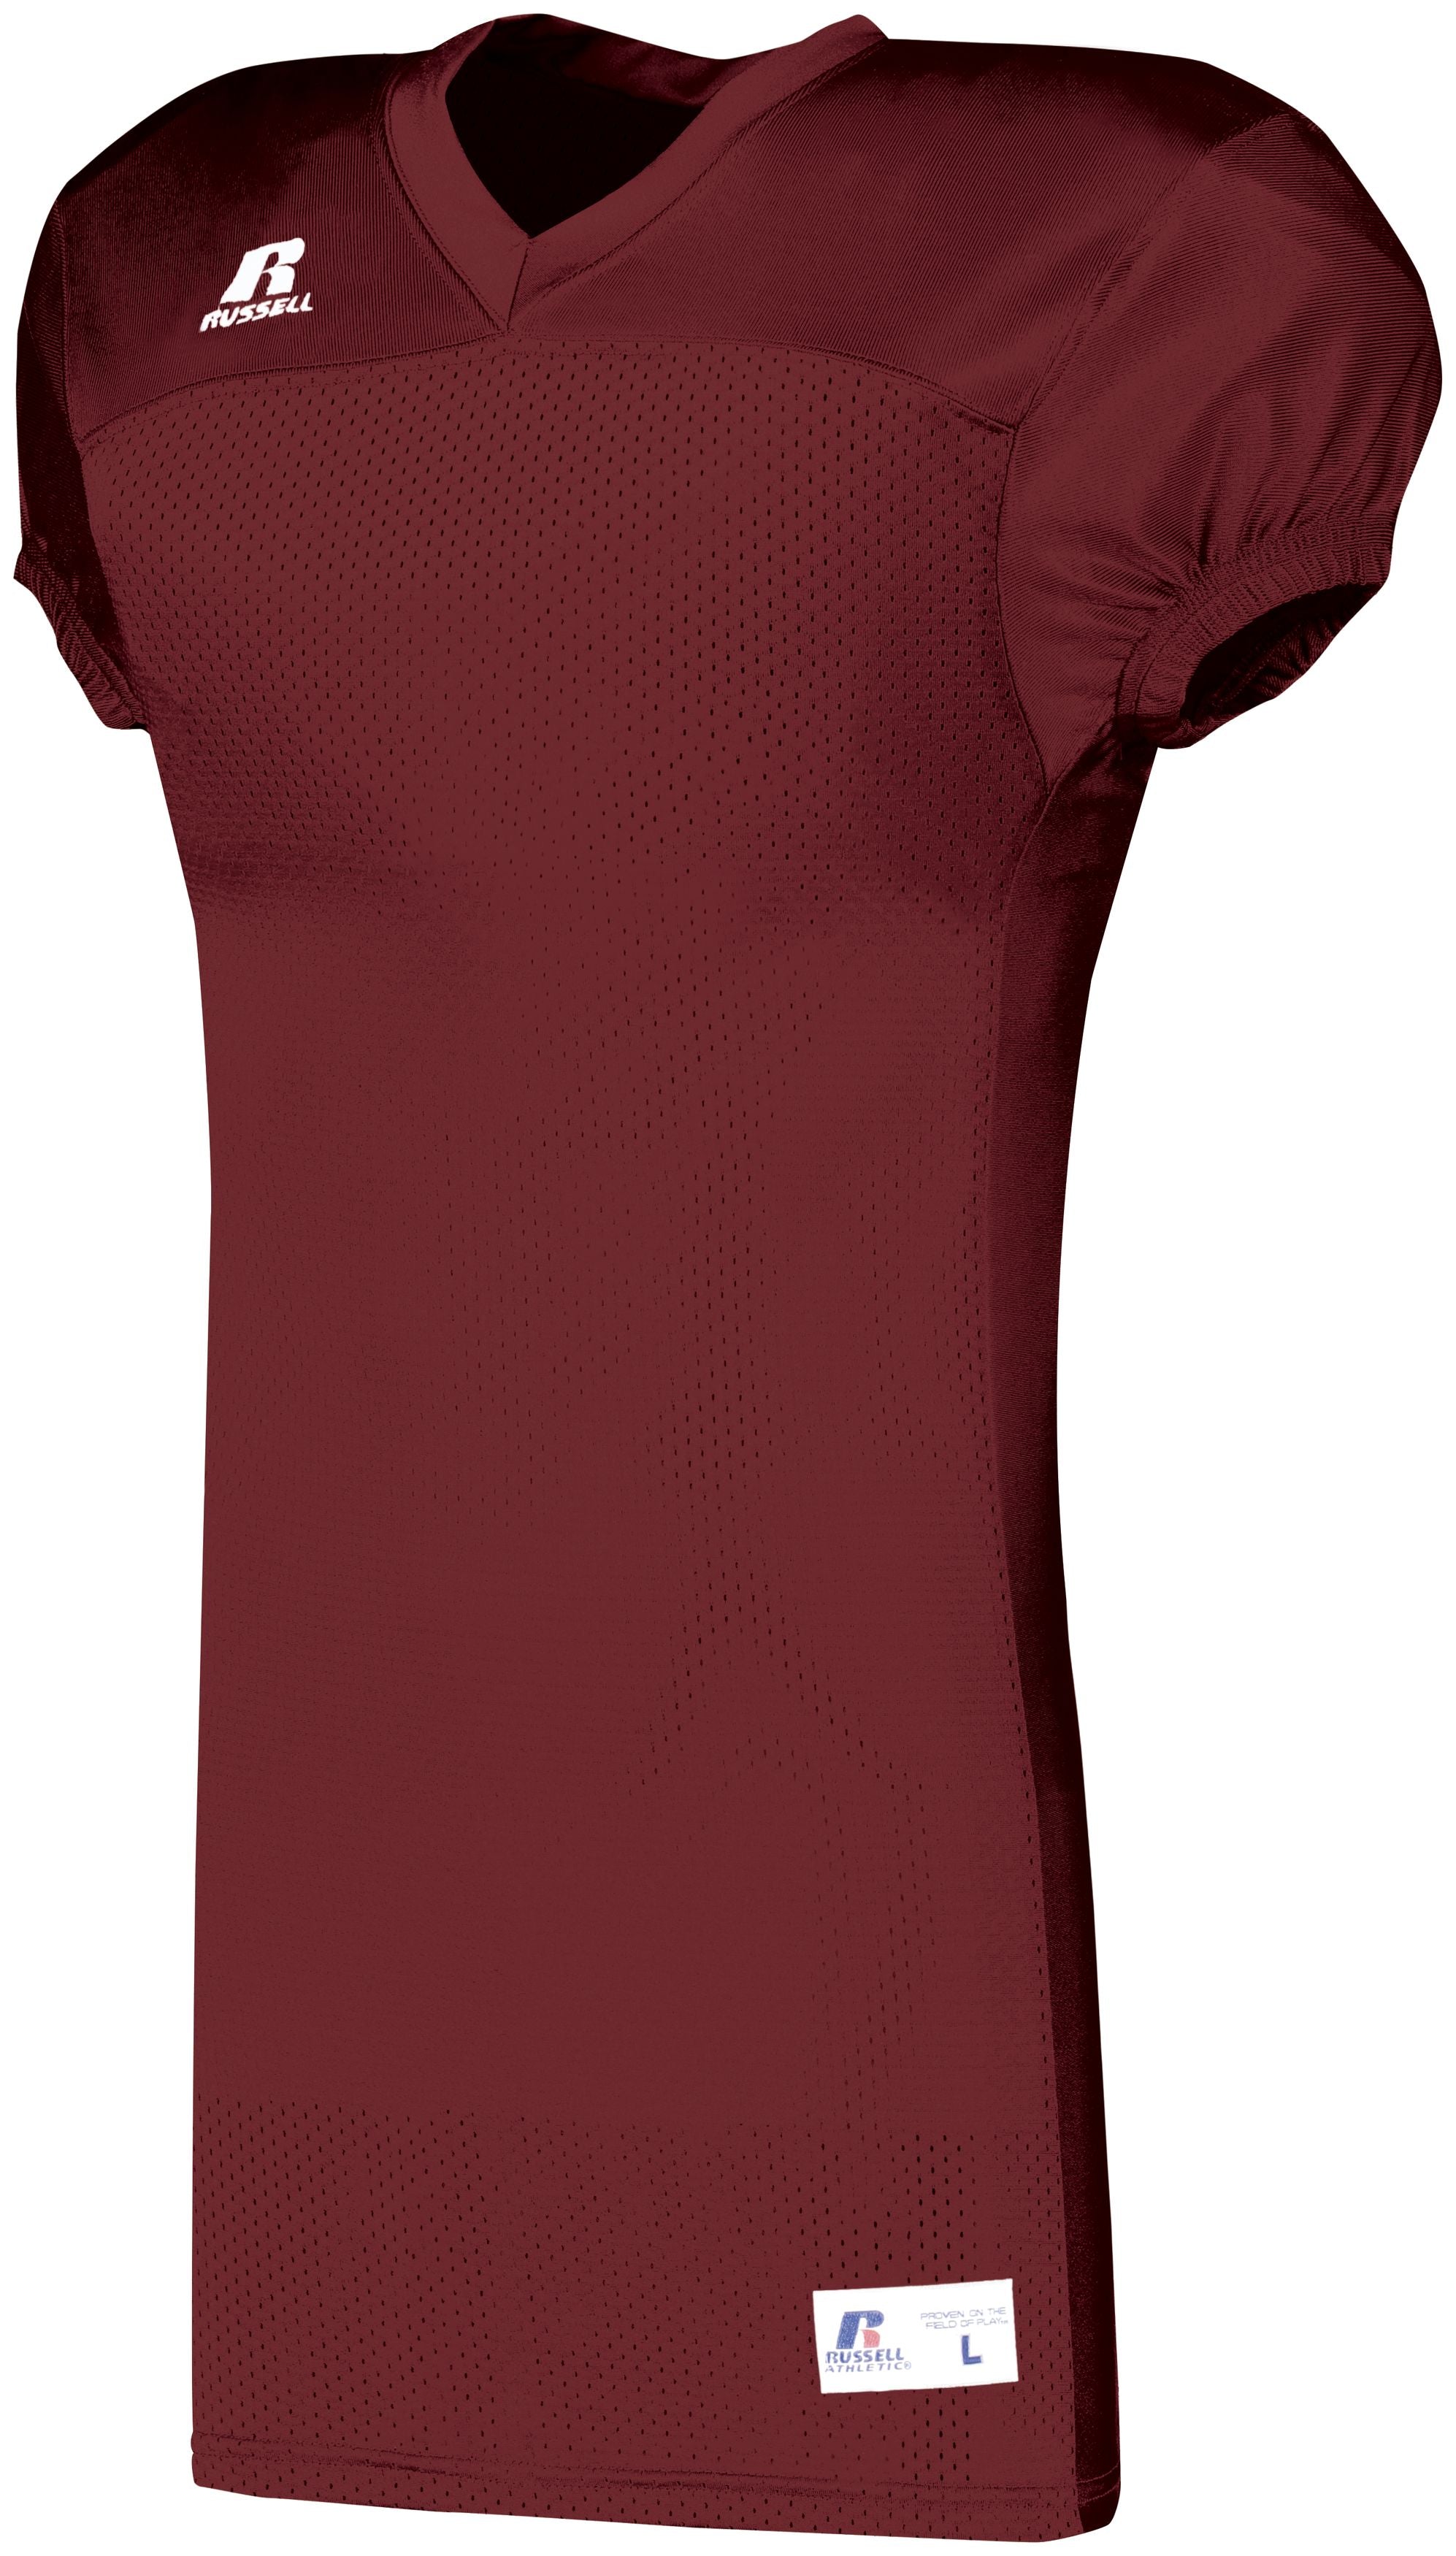 Russell Athletic Youth Solid Jersey With Side Inserts in Cardinal  -Part of the Youth, Youth-Jersey, Football, Russell-Athletic-Products, Shirts, All-Sports, All-Sports-1 product lines at KanaleyCreations.com